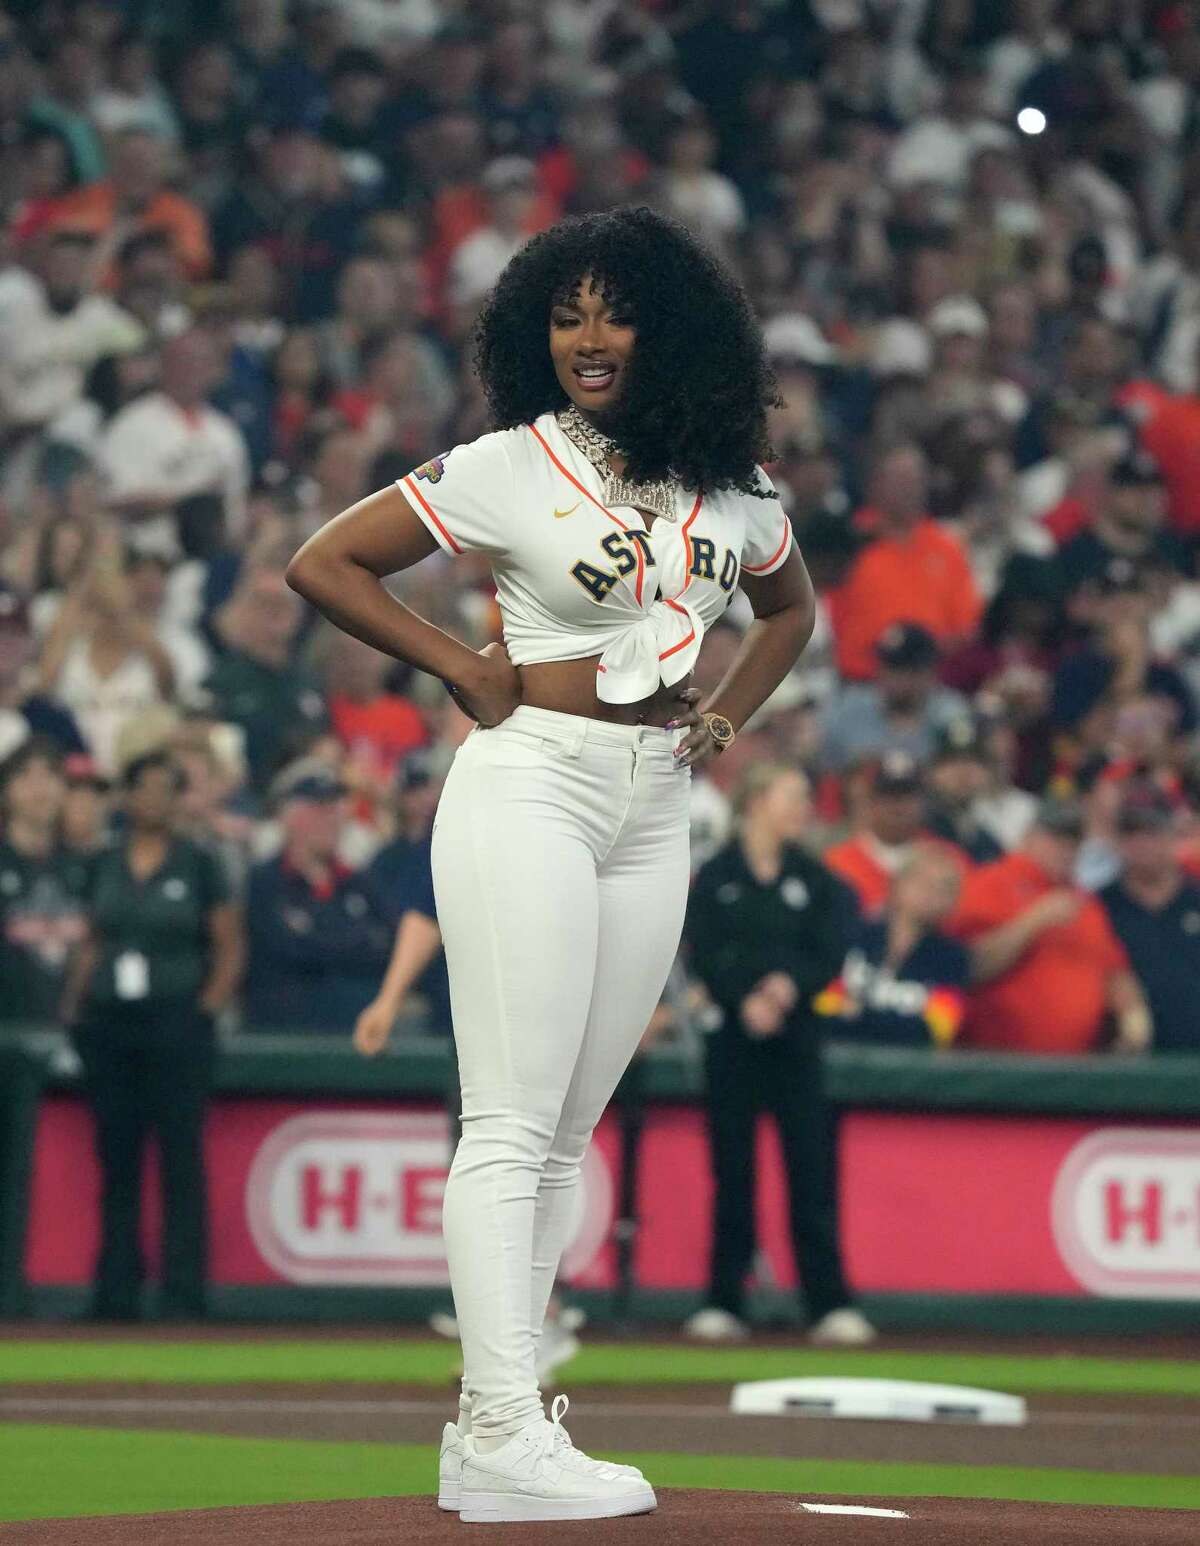 Celebs, former Astros throwing out first pitches before ALCS